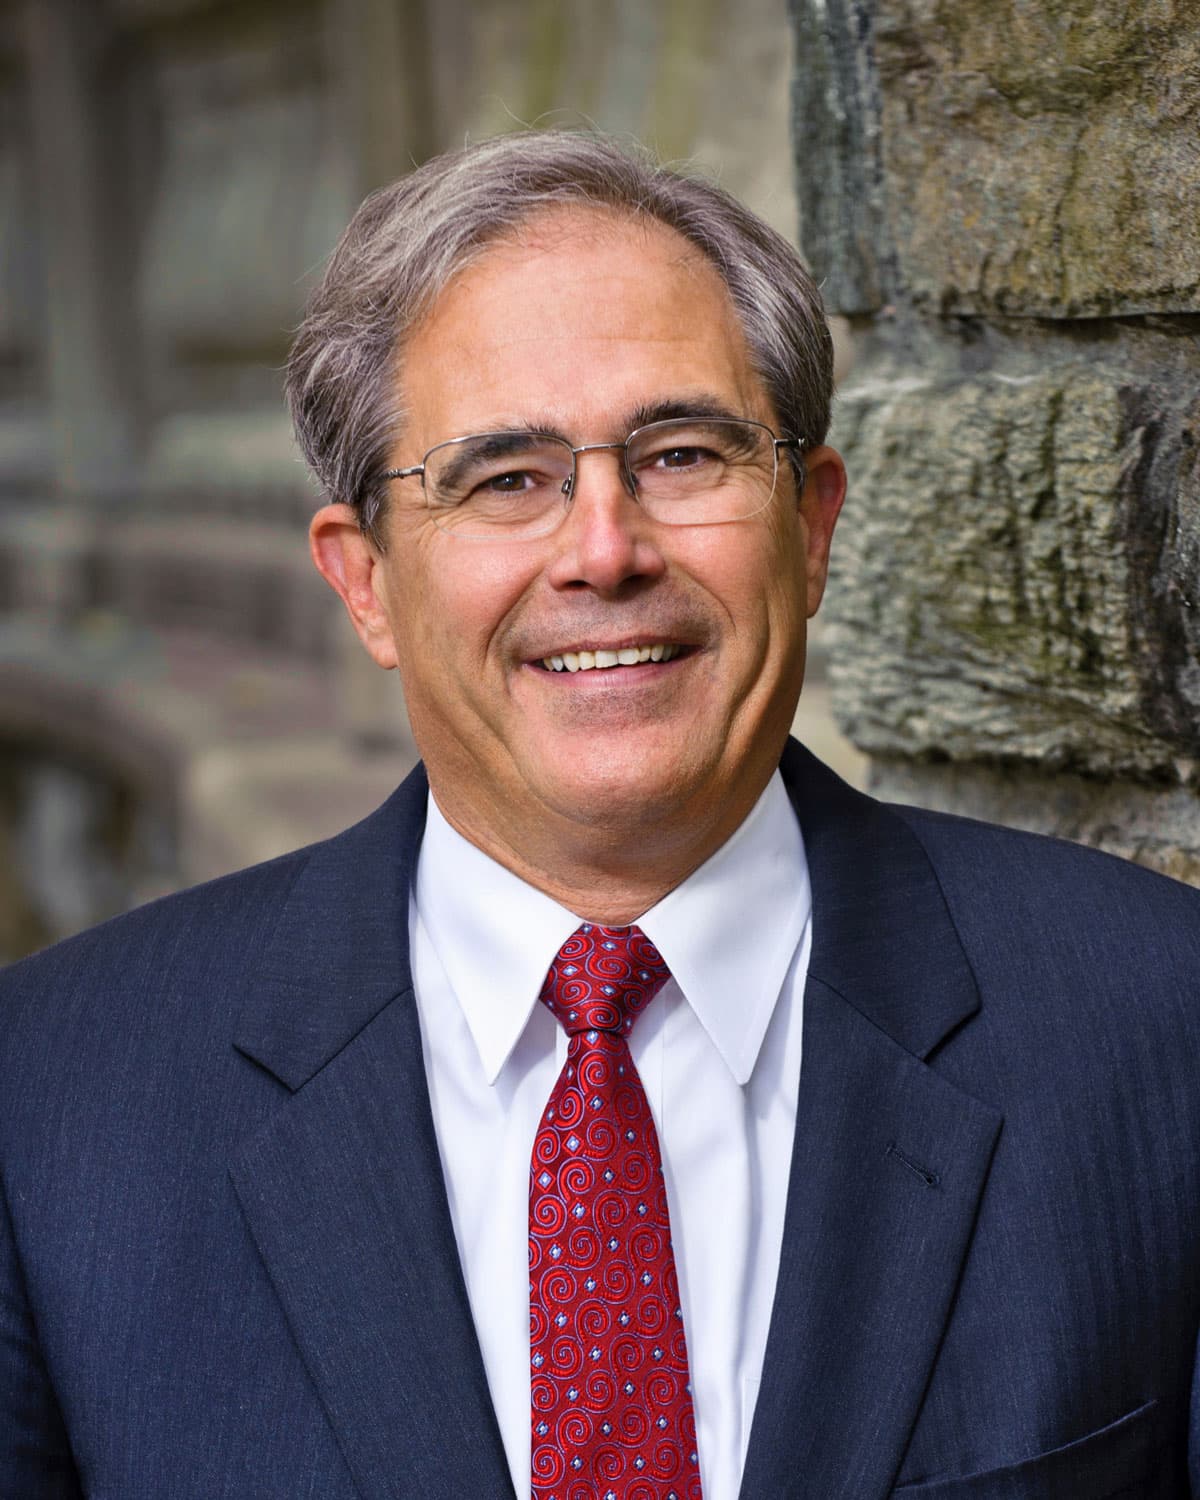 Professional headshot photograph of Kenneth Veit, DO '76, MBA, provost, senior vice president of academic affairs and dean at PCOM